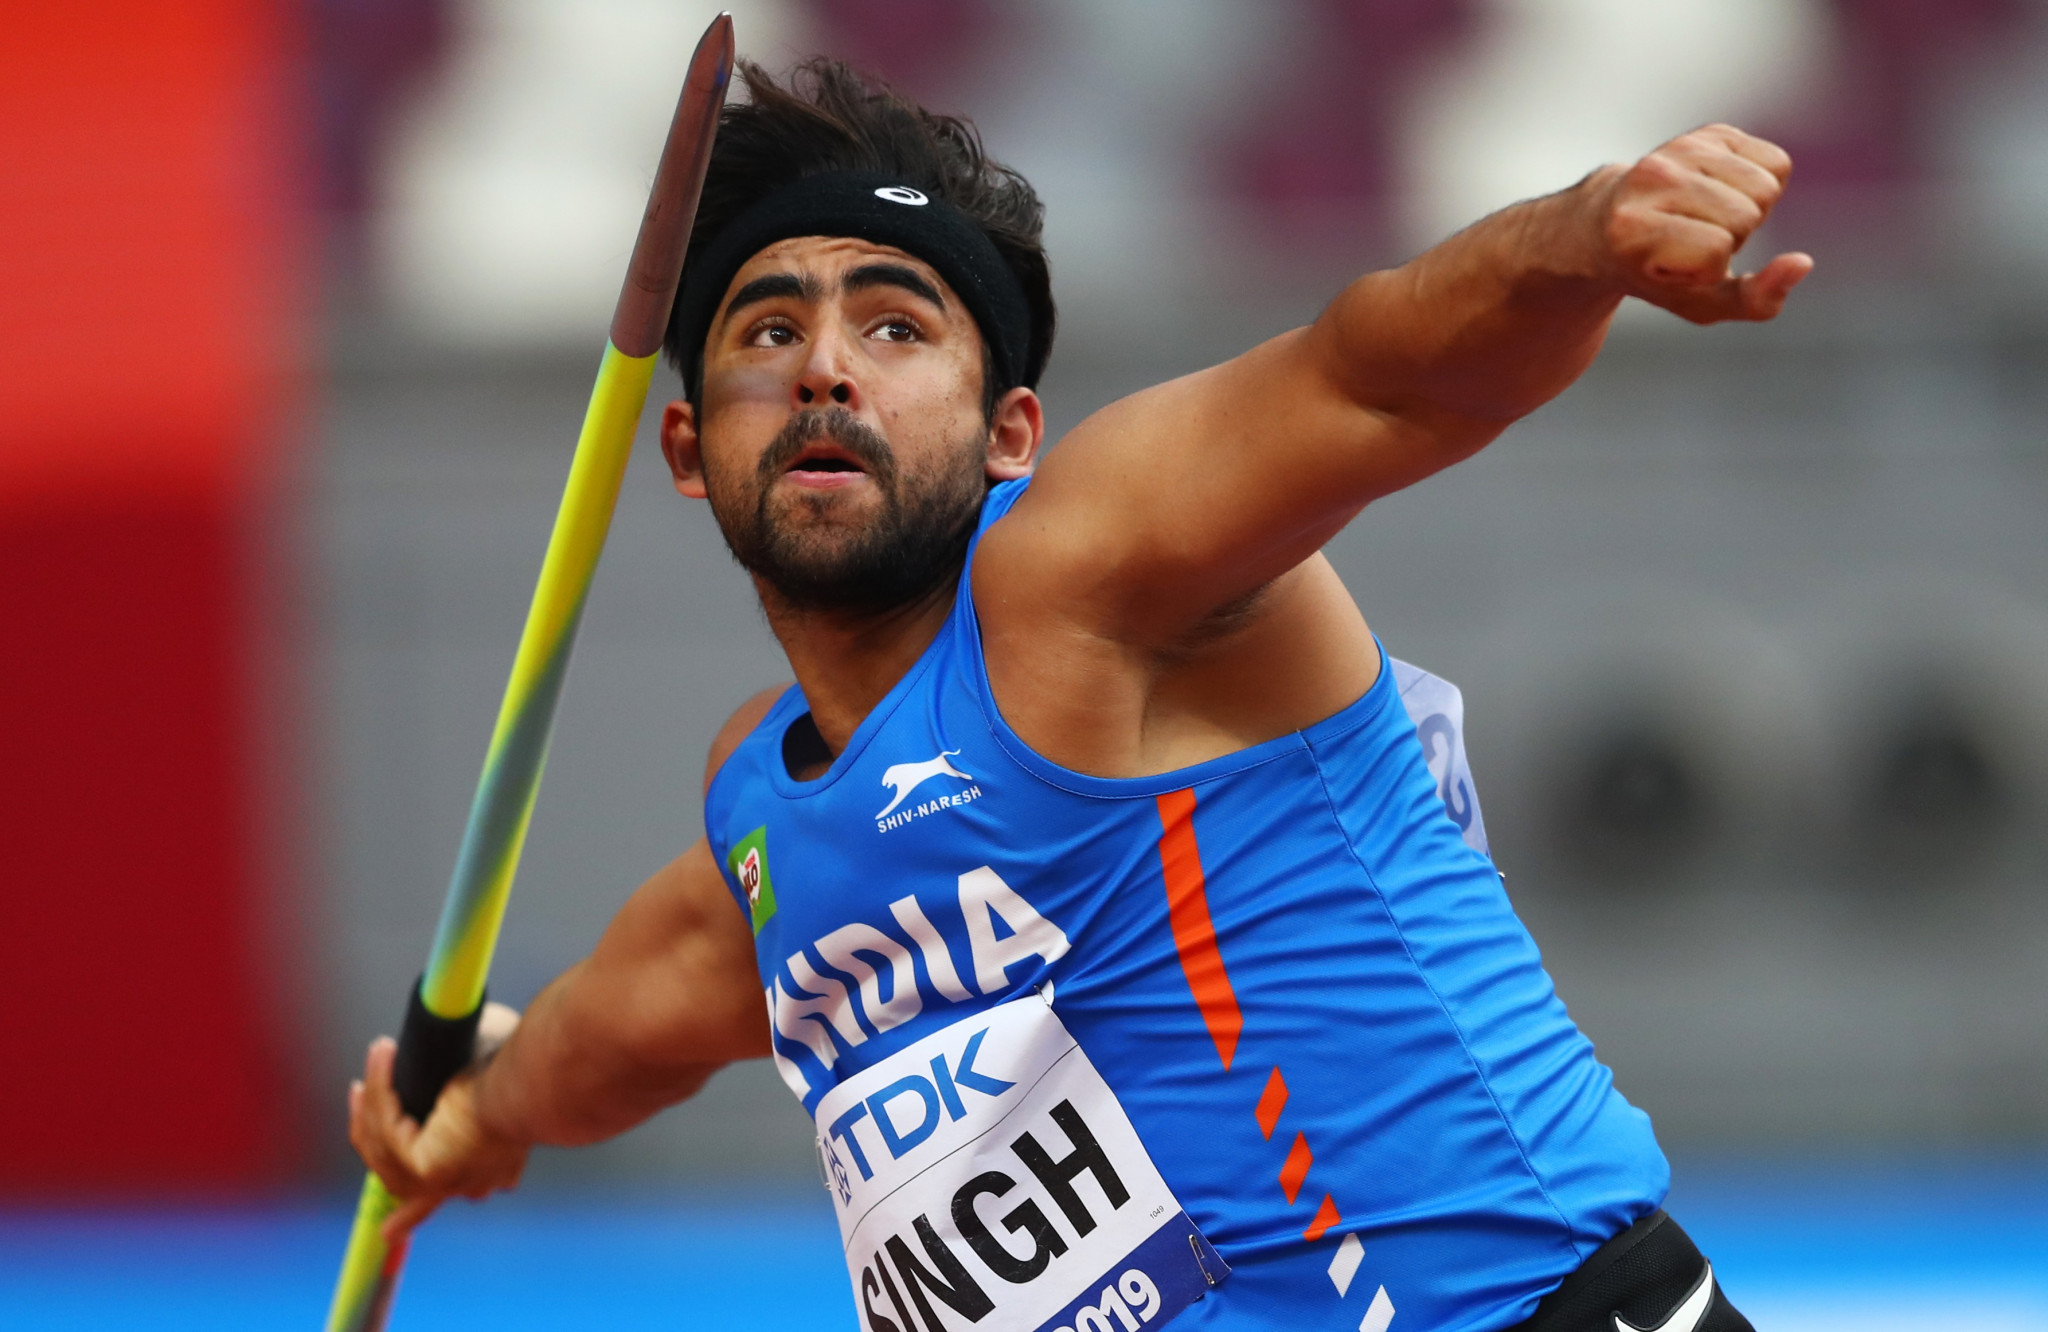 Shivpal Singh has been banned for four years for a doping violation ©Getty Images